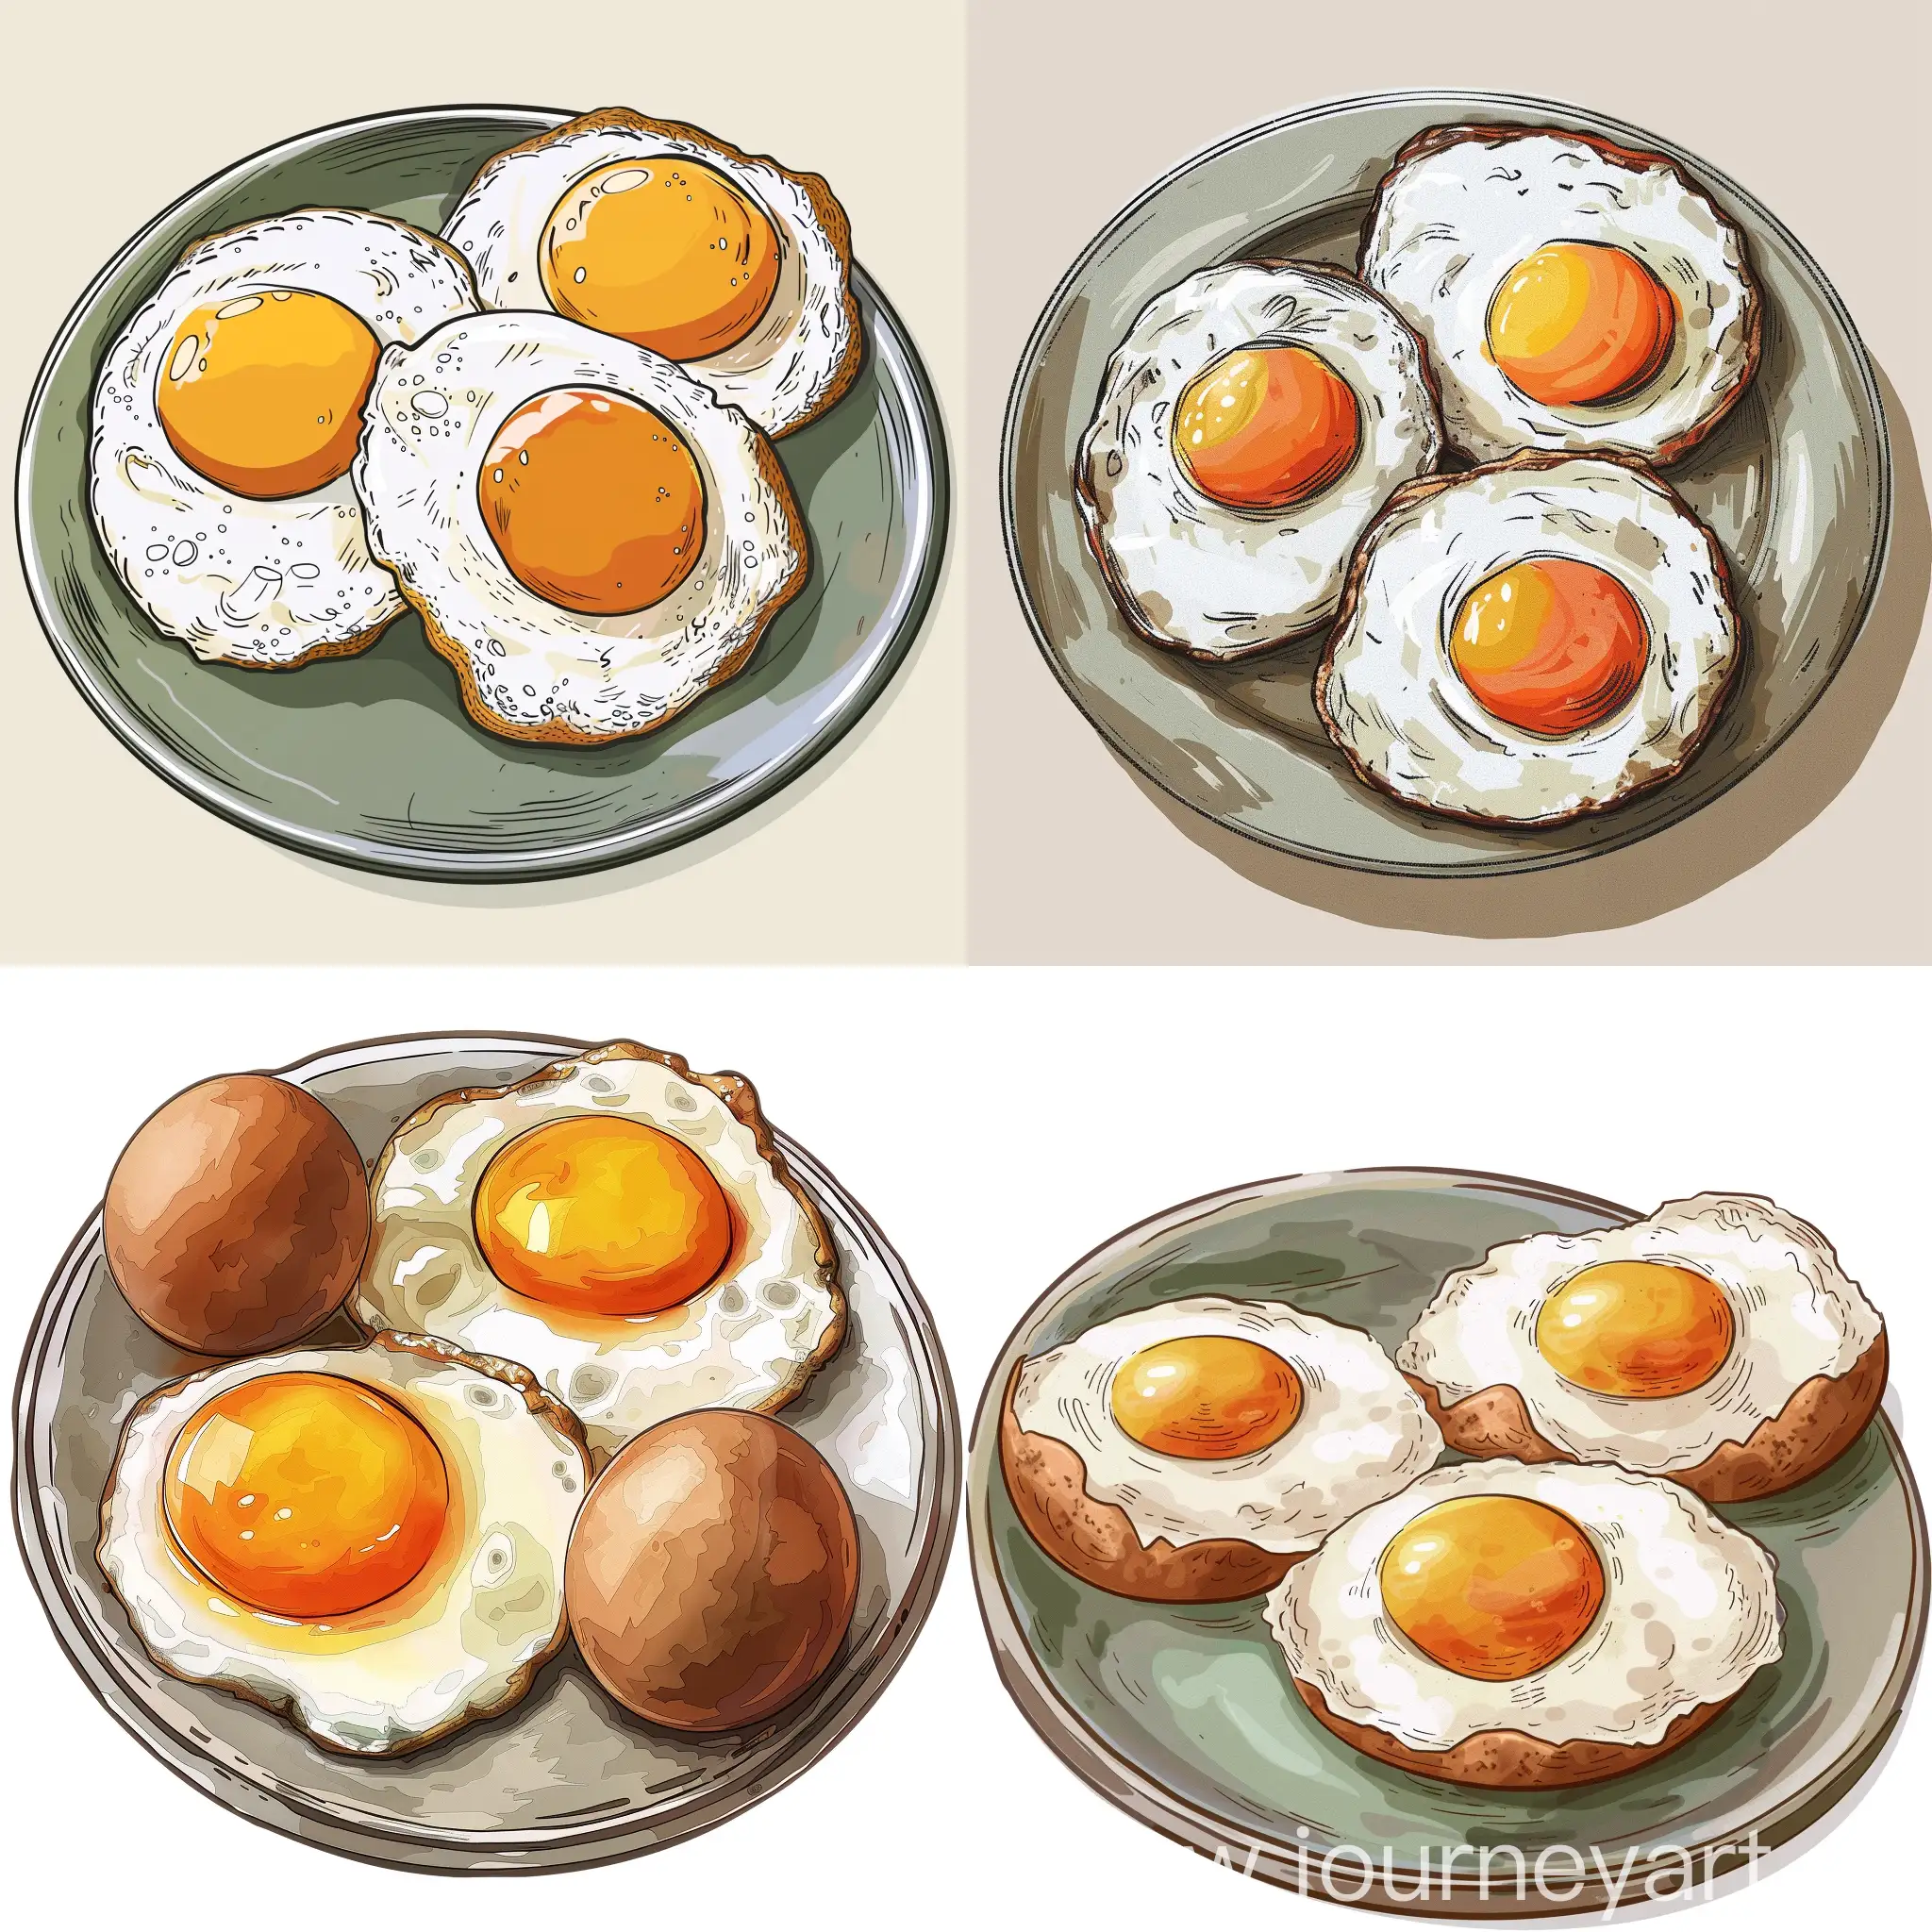 Three-Fried-Eggs-on-a-Plate-Delicious-Breakfast-Cuisine